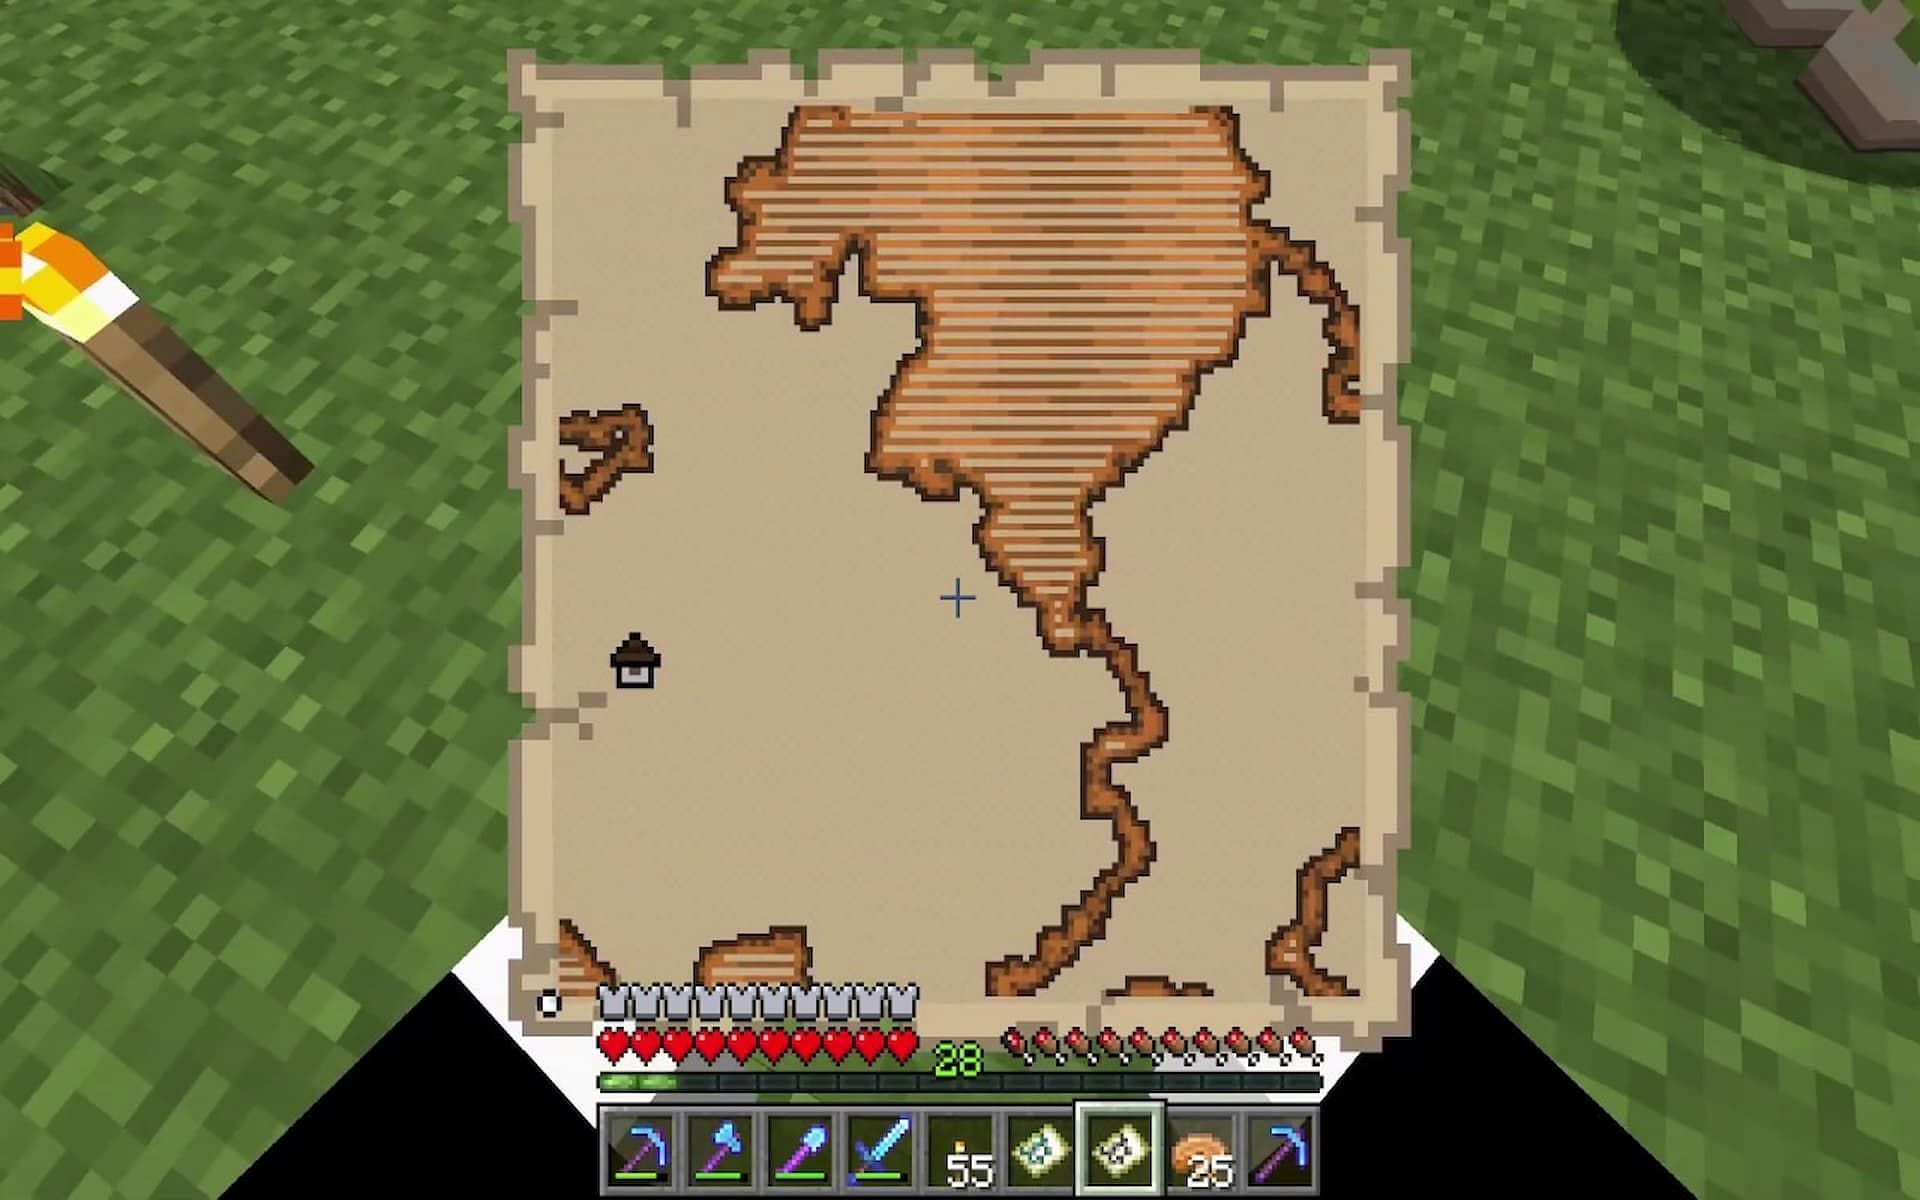 Players can use the explorers maps to locate riches (Image via YouTube/Waifu Simulator 27)